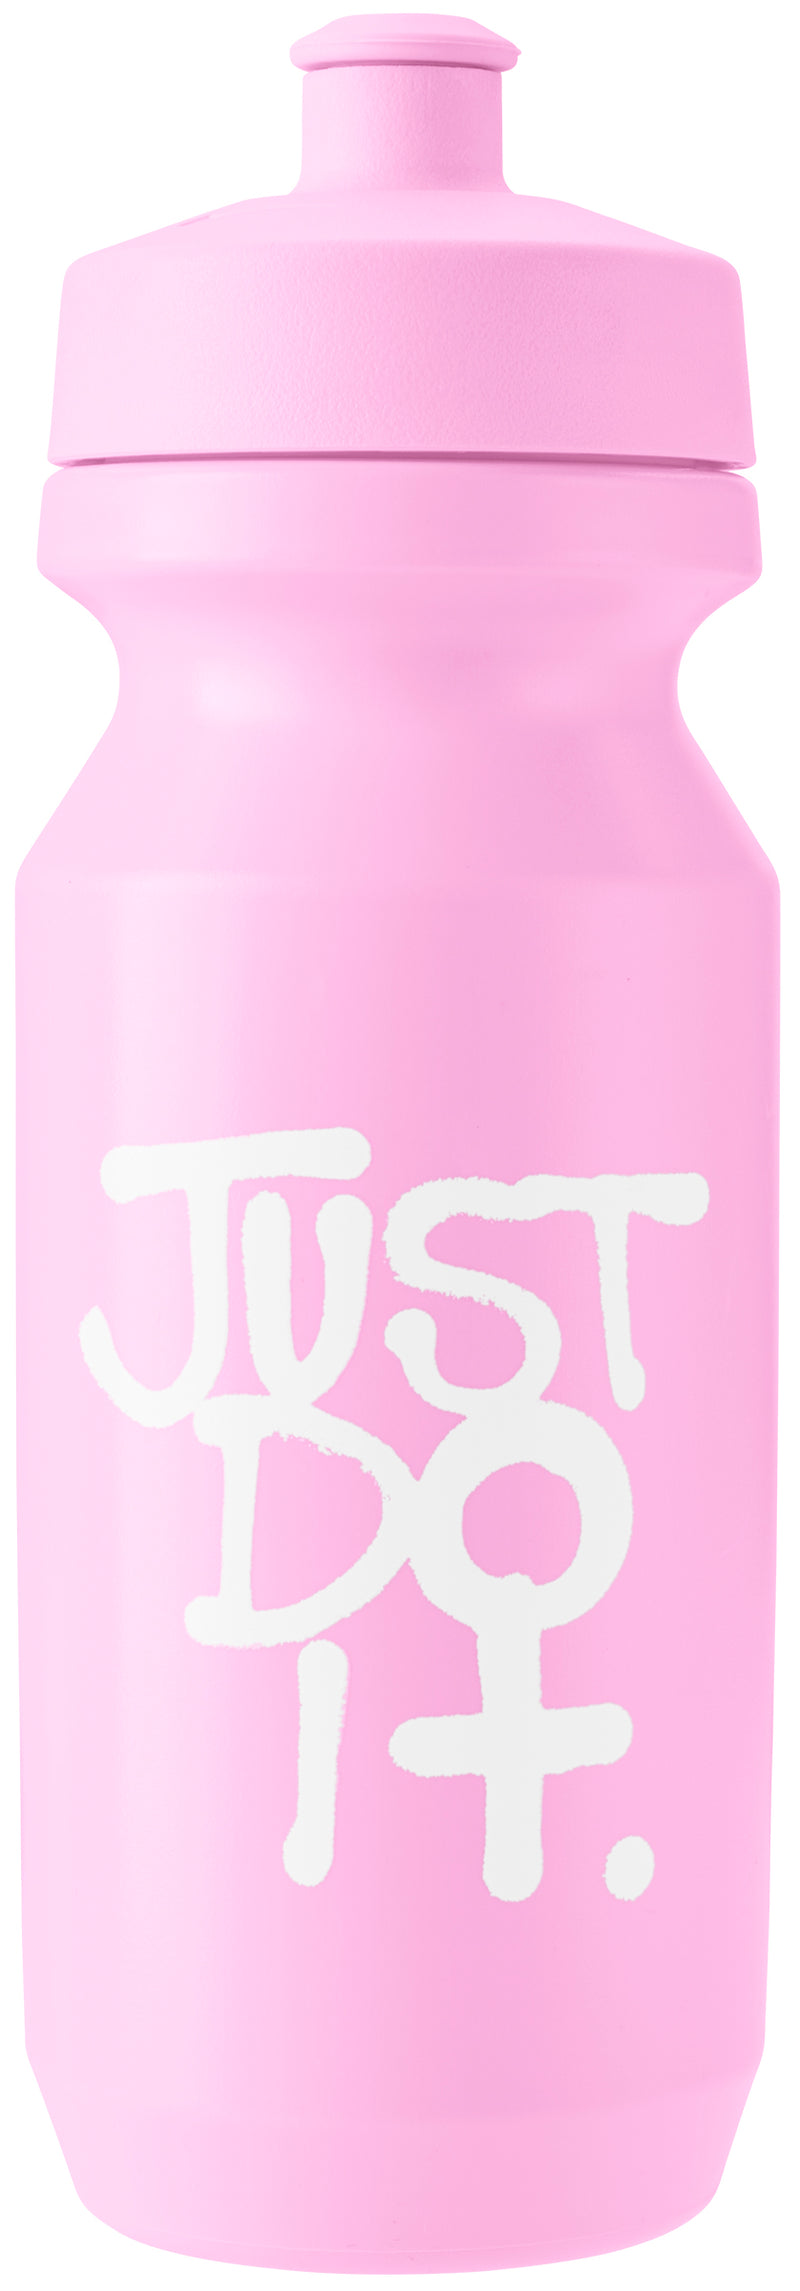 Nike Big Mouth Bottle Graphic 2.0 --_'Pink/White'_